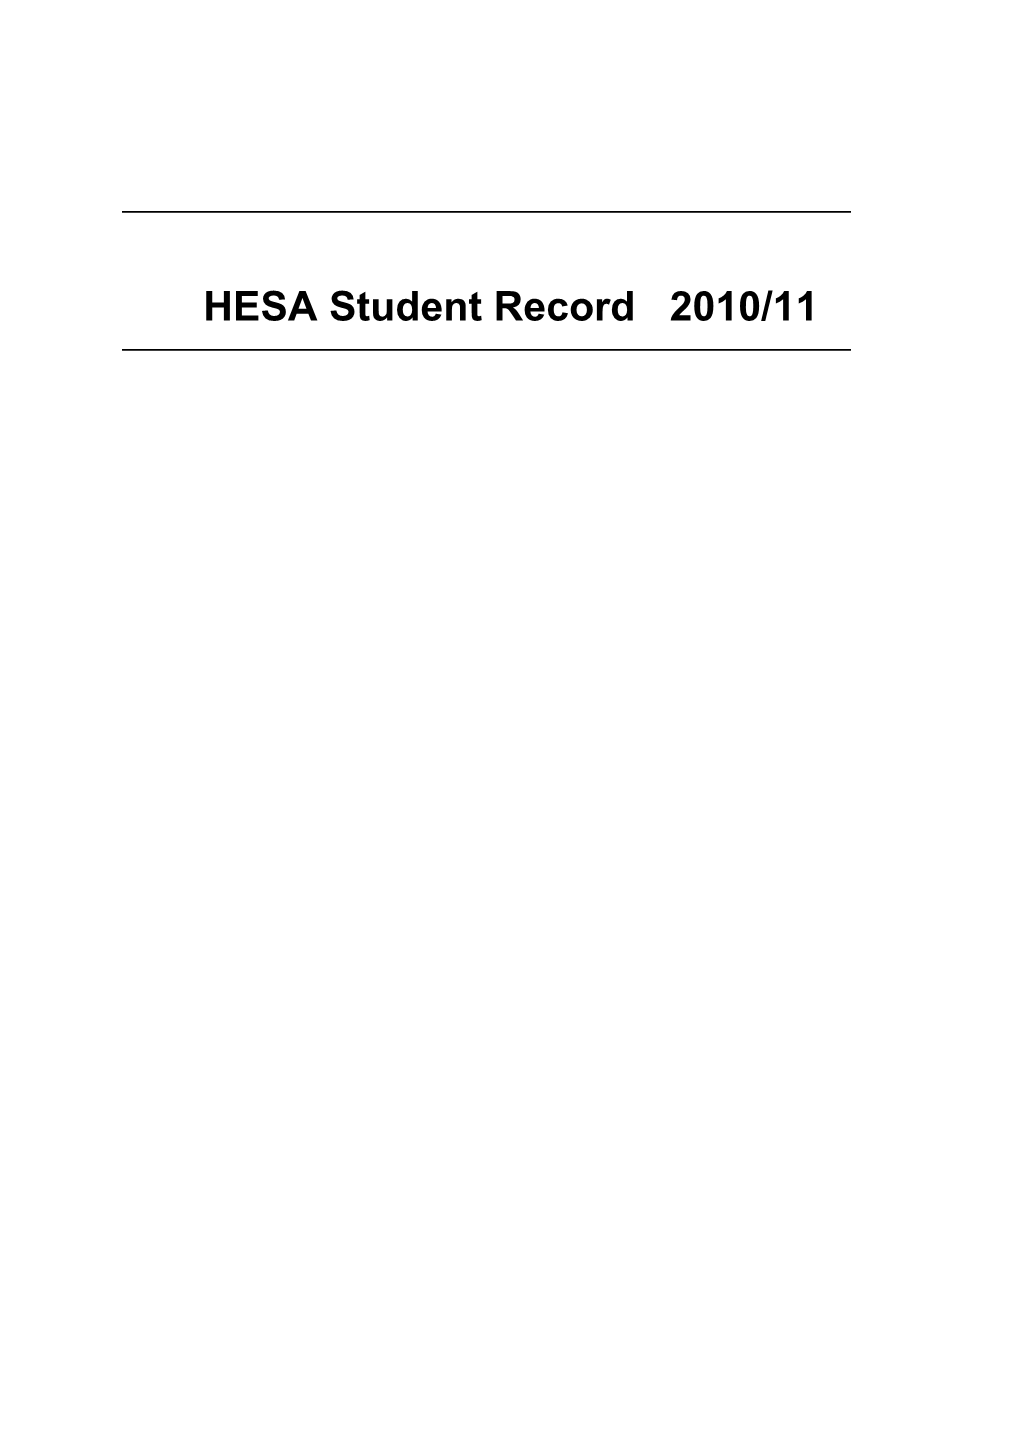 HESA Student Record 2010/11 Table of Contents (By Entity)